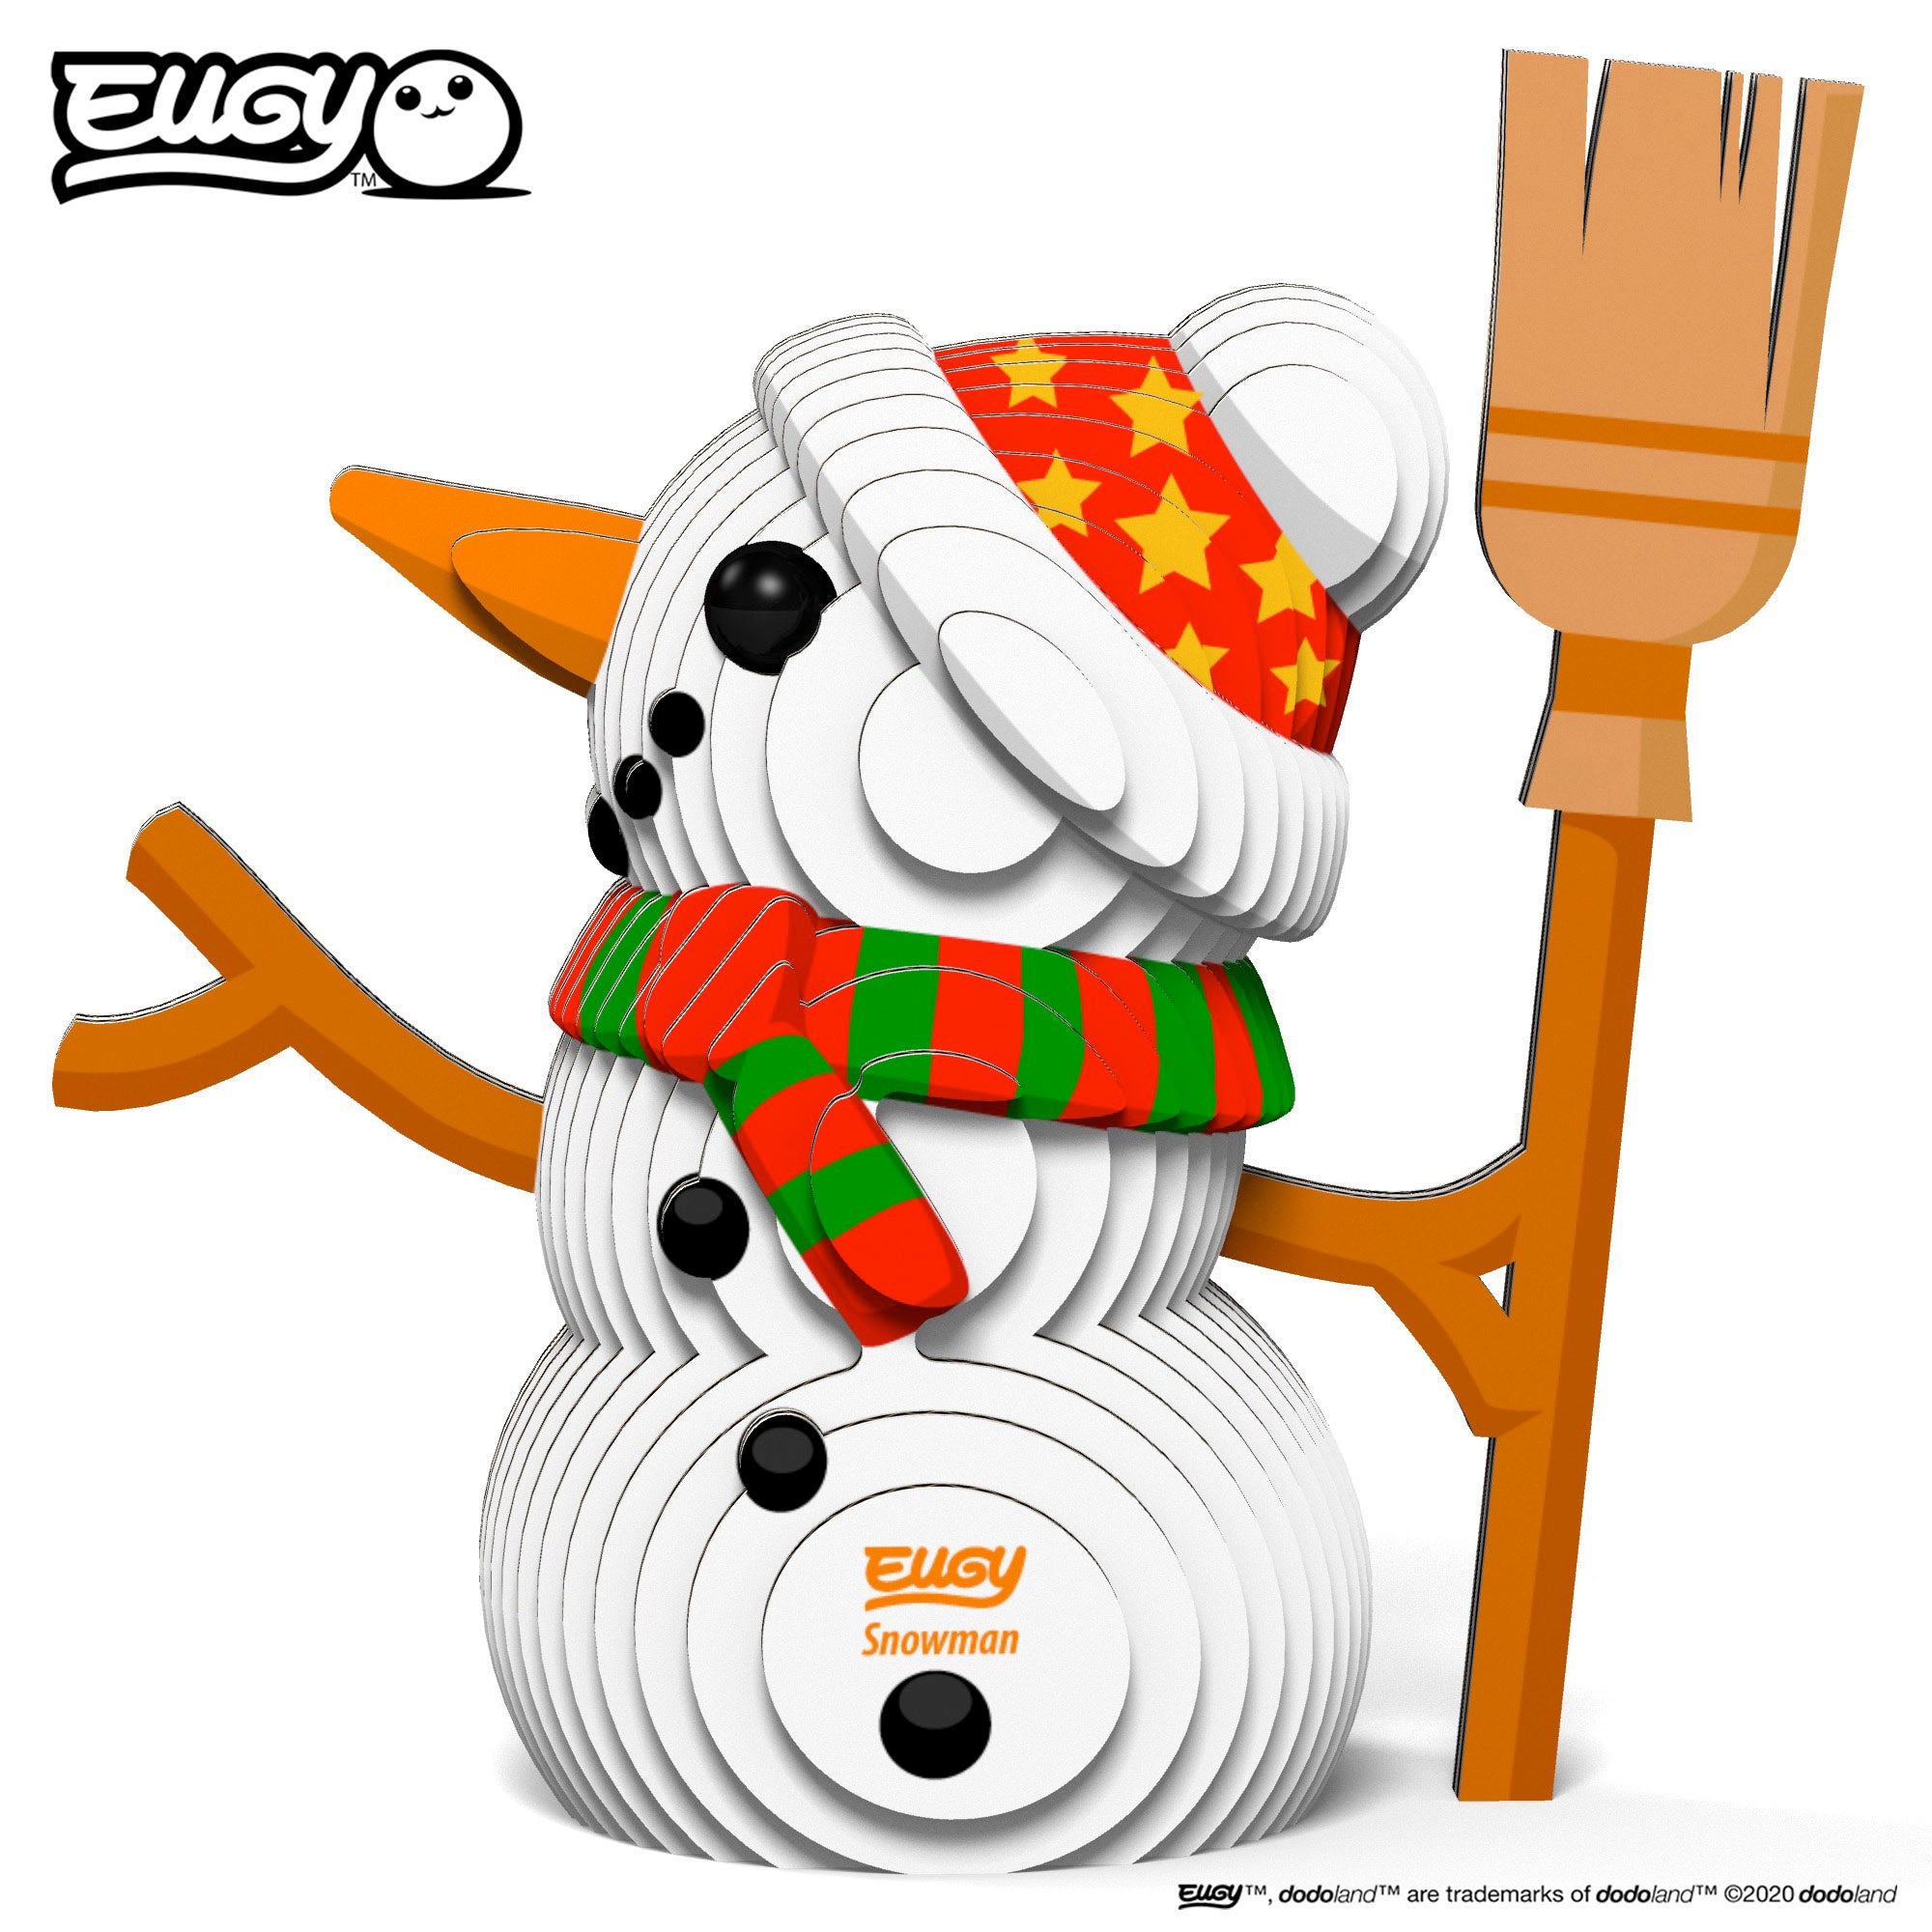 Image of an EUGY Snowman, facing left and viewed from the front. Against a white background